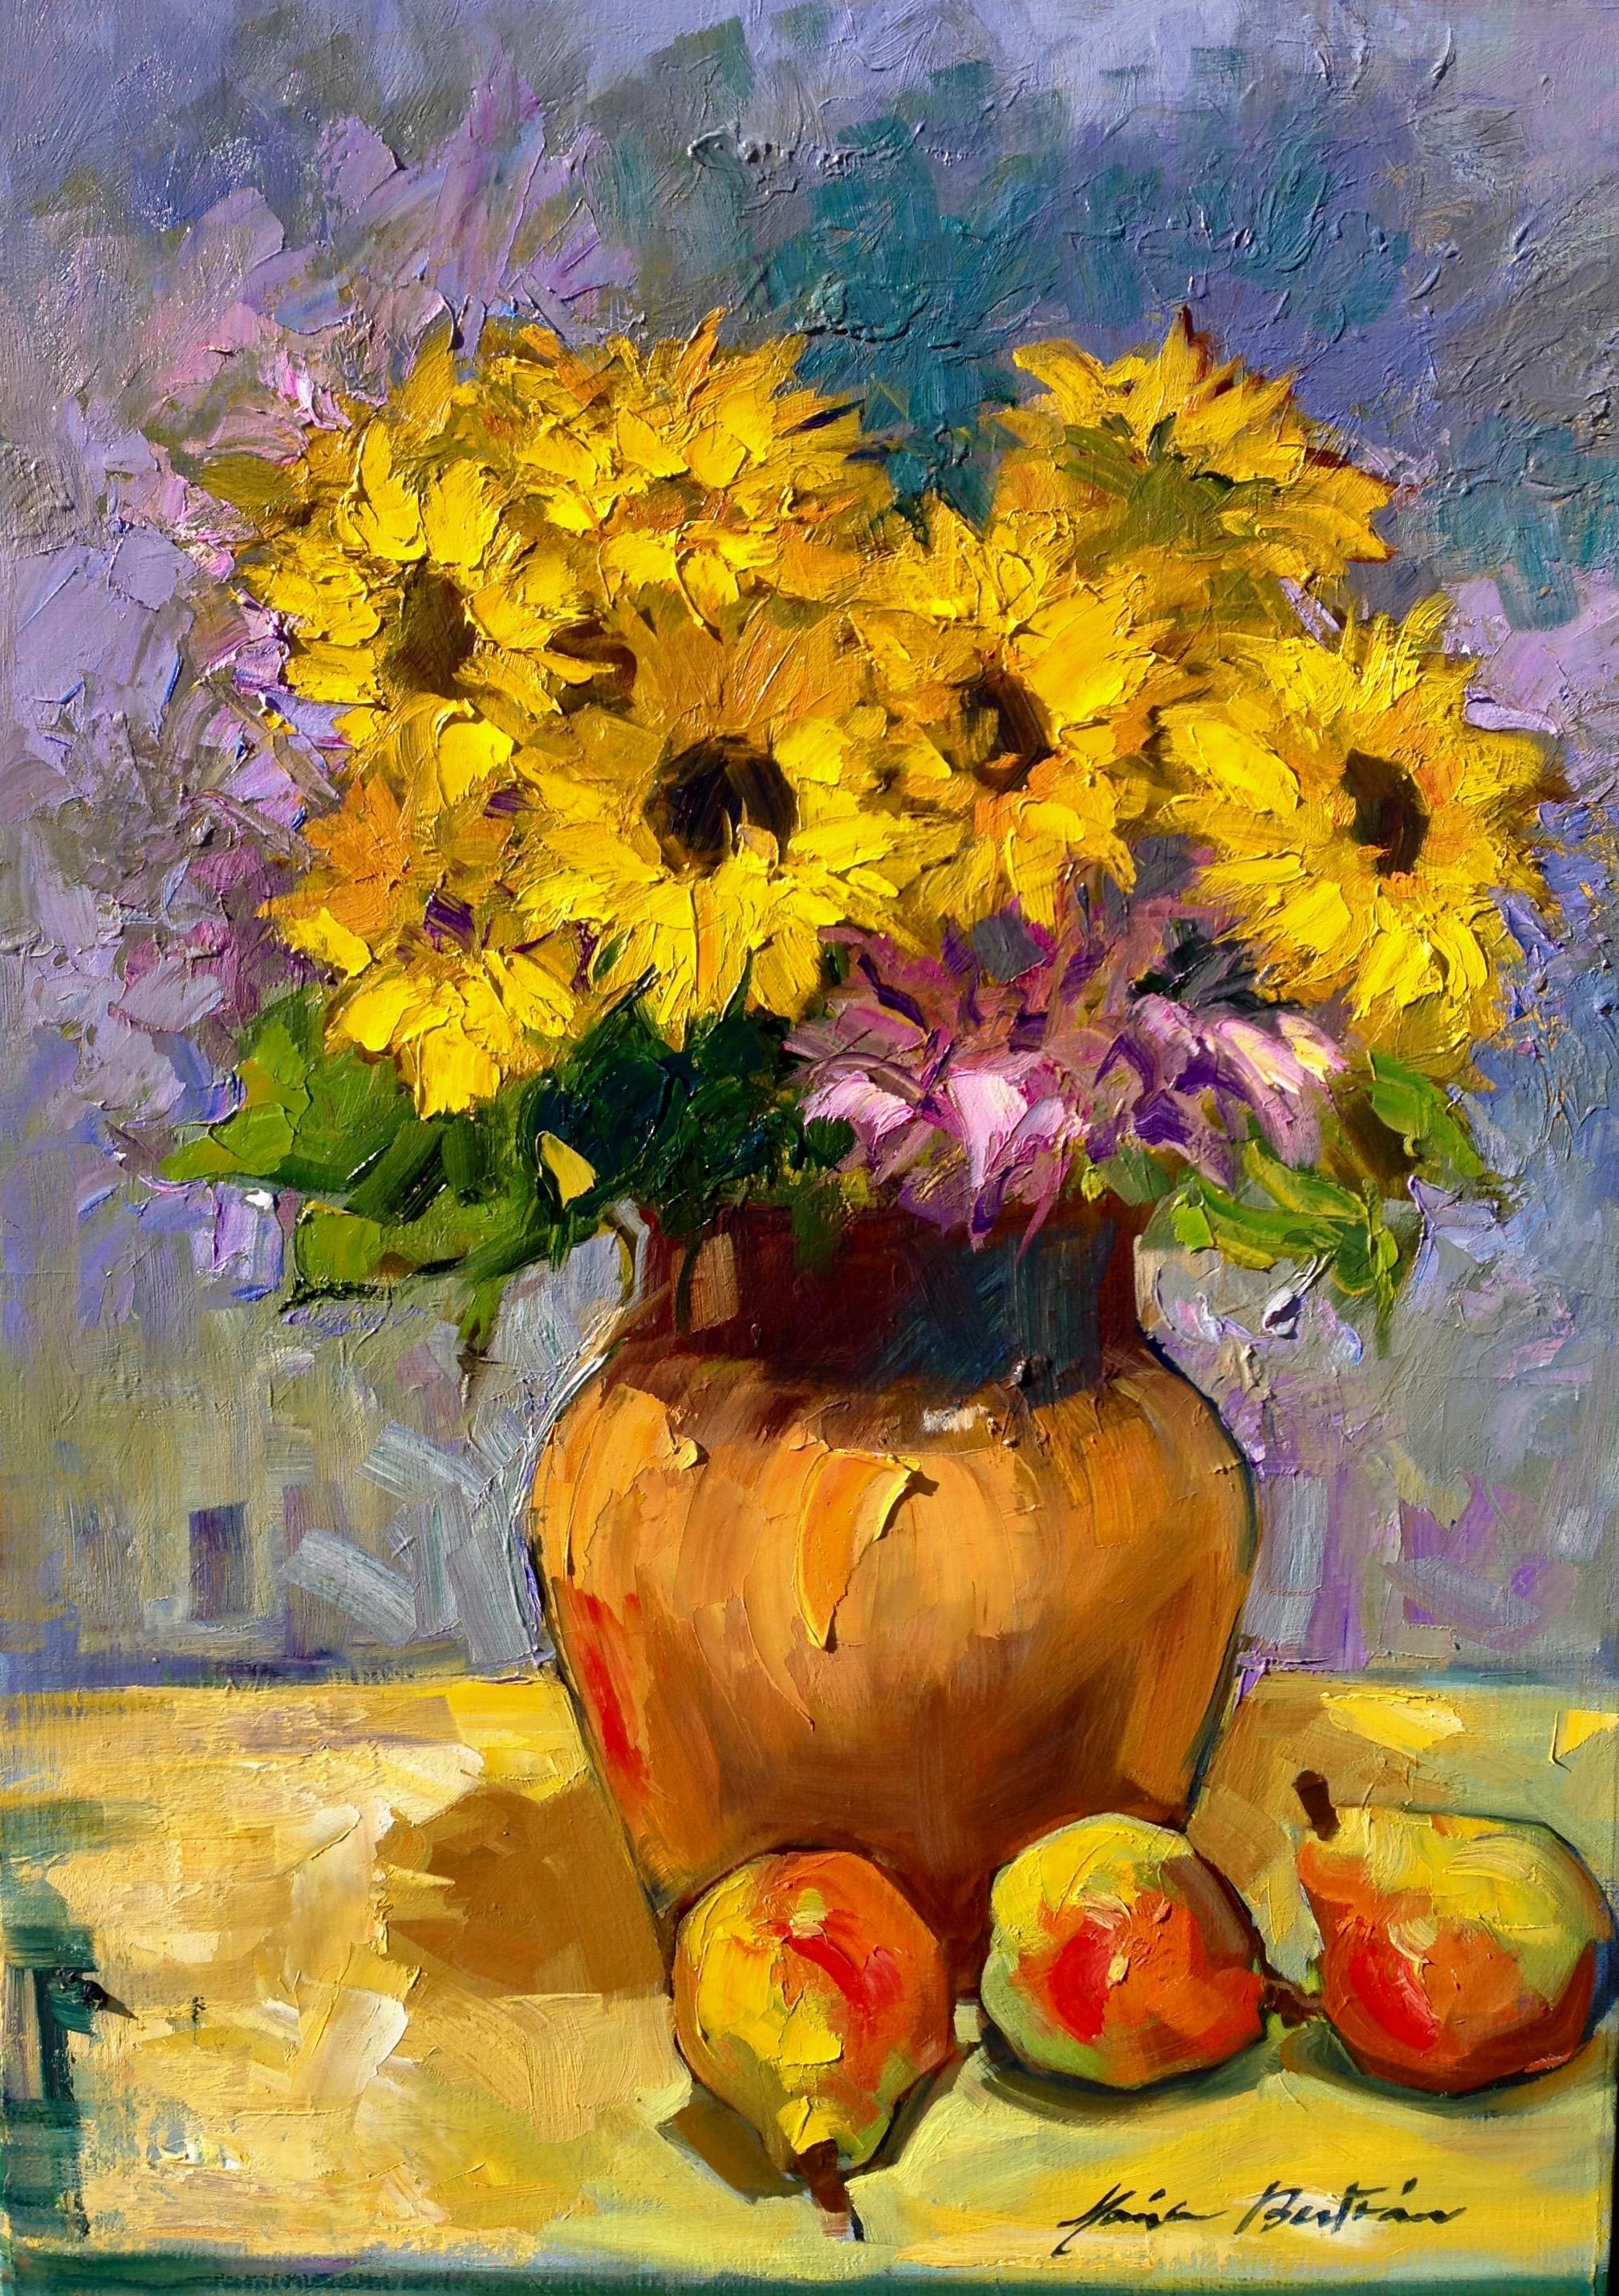 Maria Bertrán Still-Life Painting - "Golden Sunflowers with Lavender" Contemporary Impressionist Still Life 